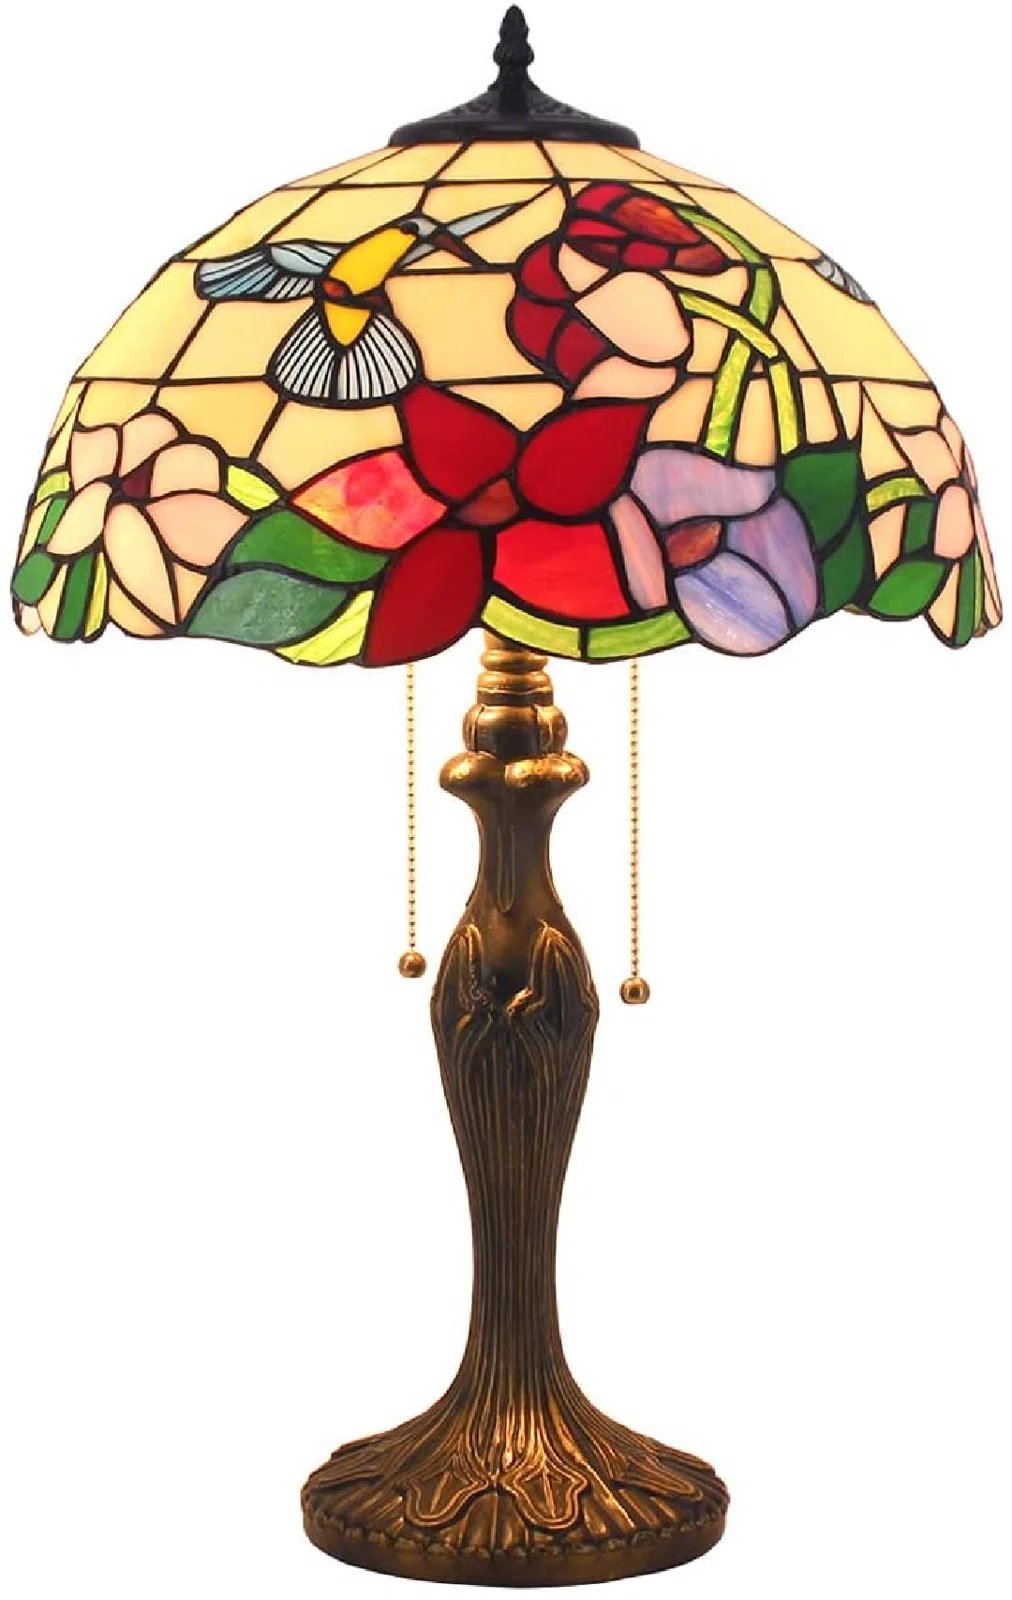 Tiffany Lamp Table Stained Glass Hummingbird Style Shade Metal Base 24"Tall Large Luxurious Bedside Desk Reading Light Friend Kid Living Room Bedroom Lover Memory Sympathy Country Farmhouse